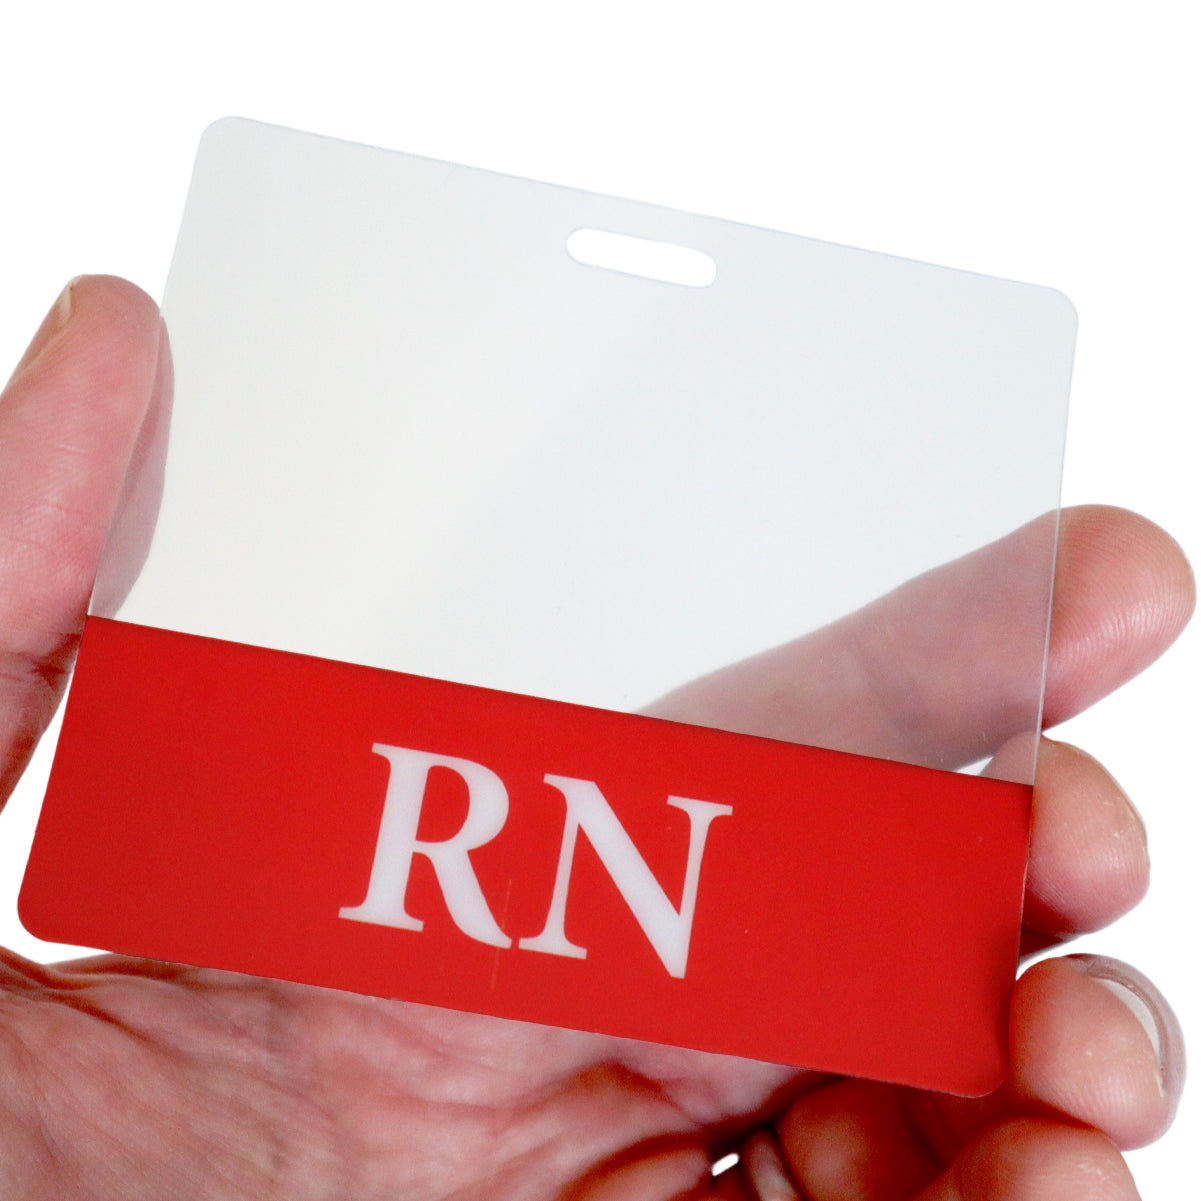 A hand holds a Clear RN Badge Buddy - Horizontal ID Badge Backer for Nurses - Double Sided Print with a red and white design and the letters "RN" clearly displayed on it.